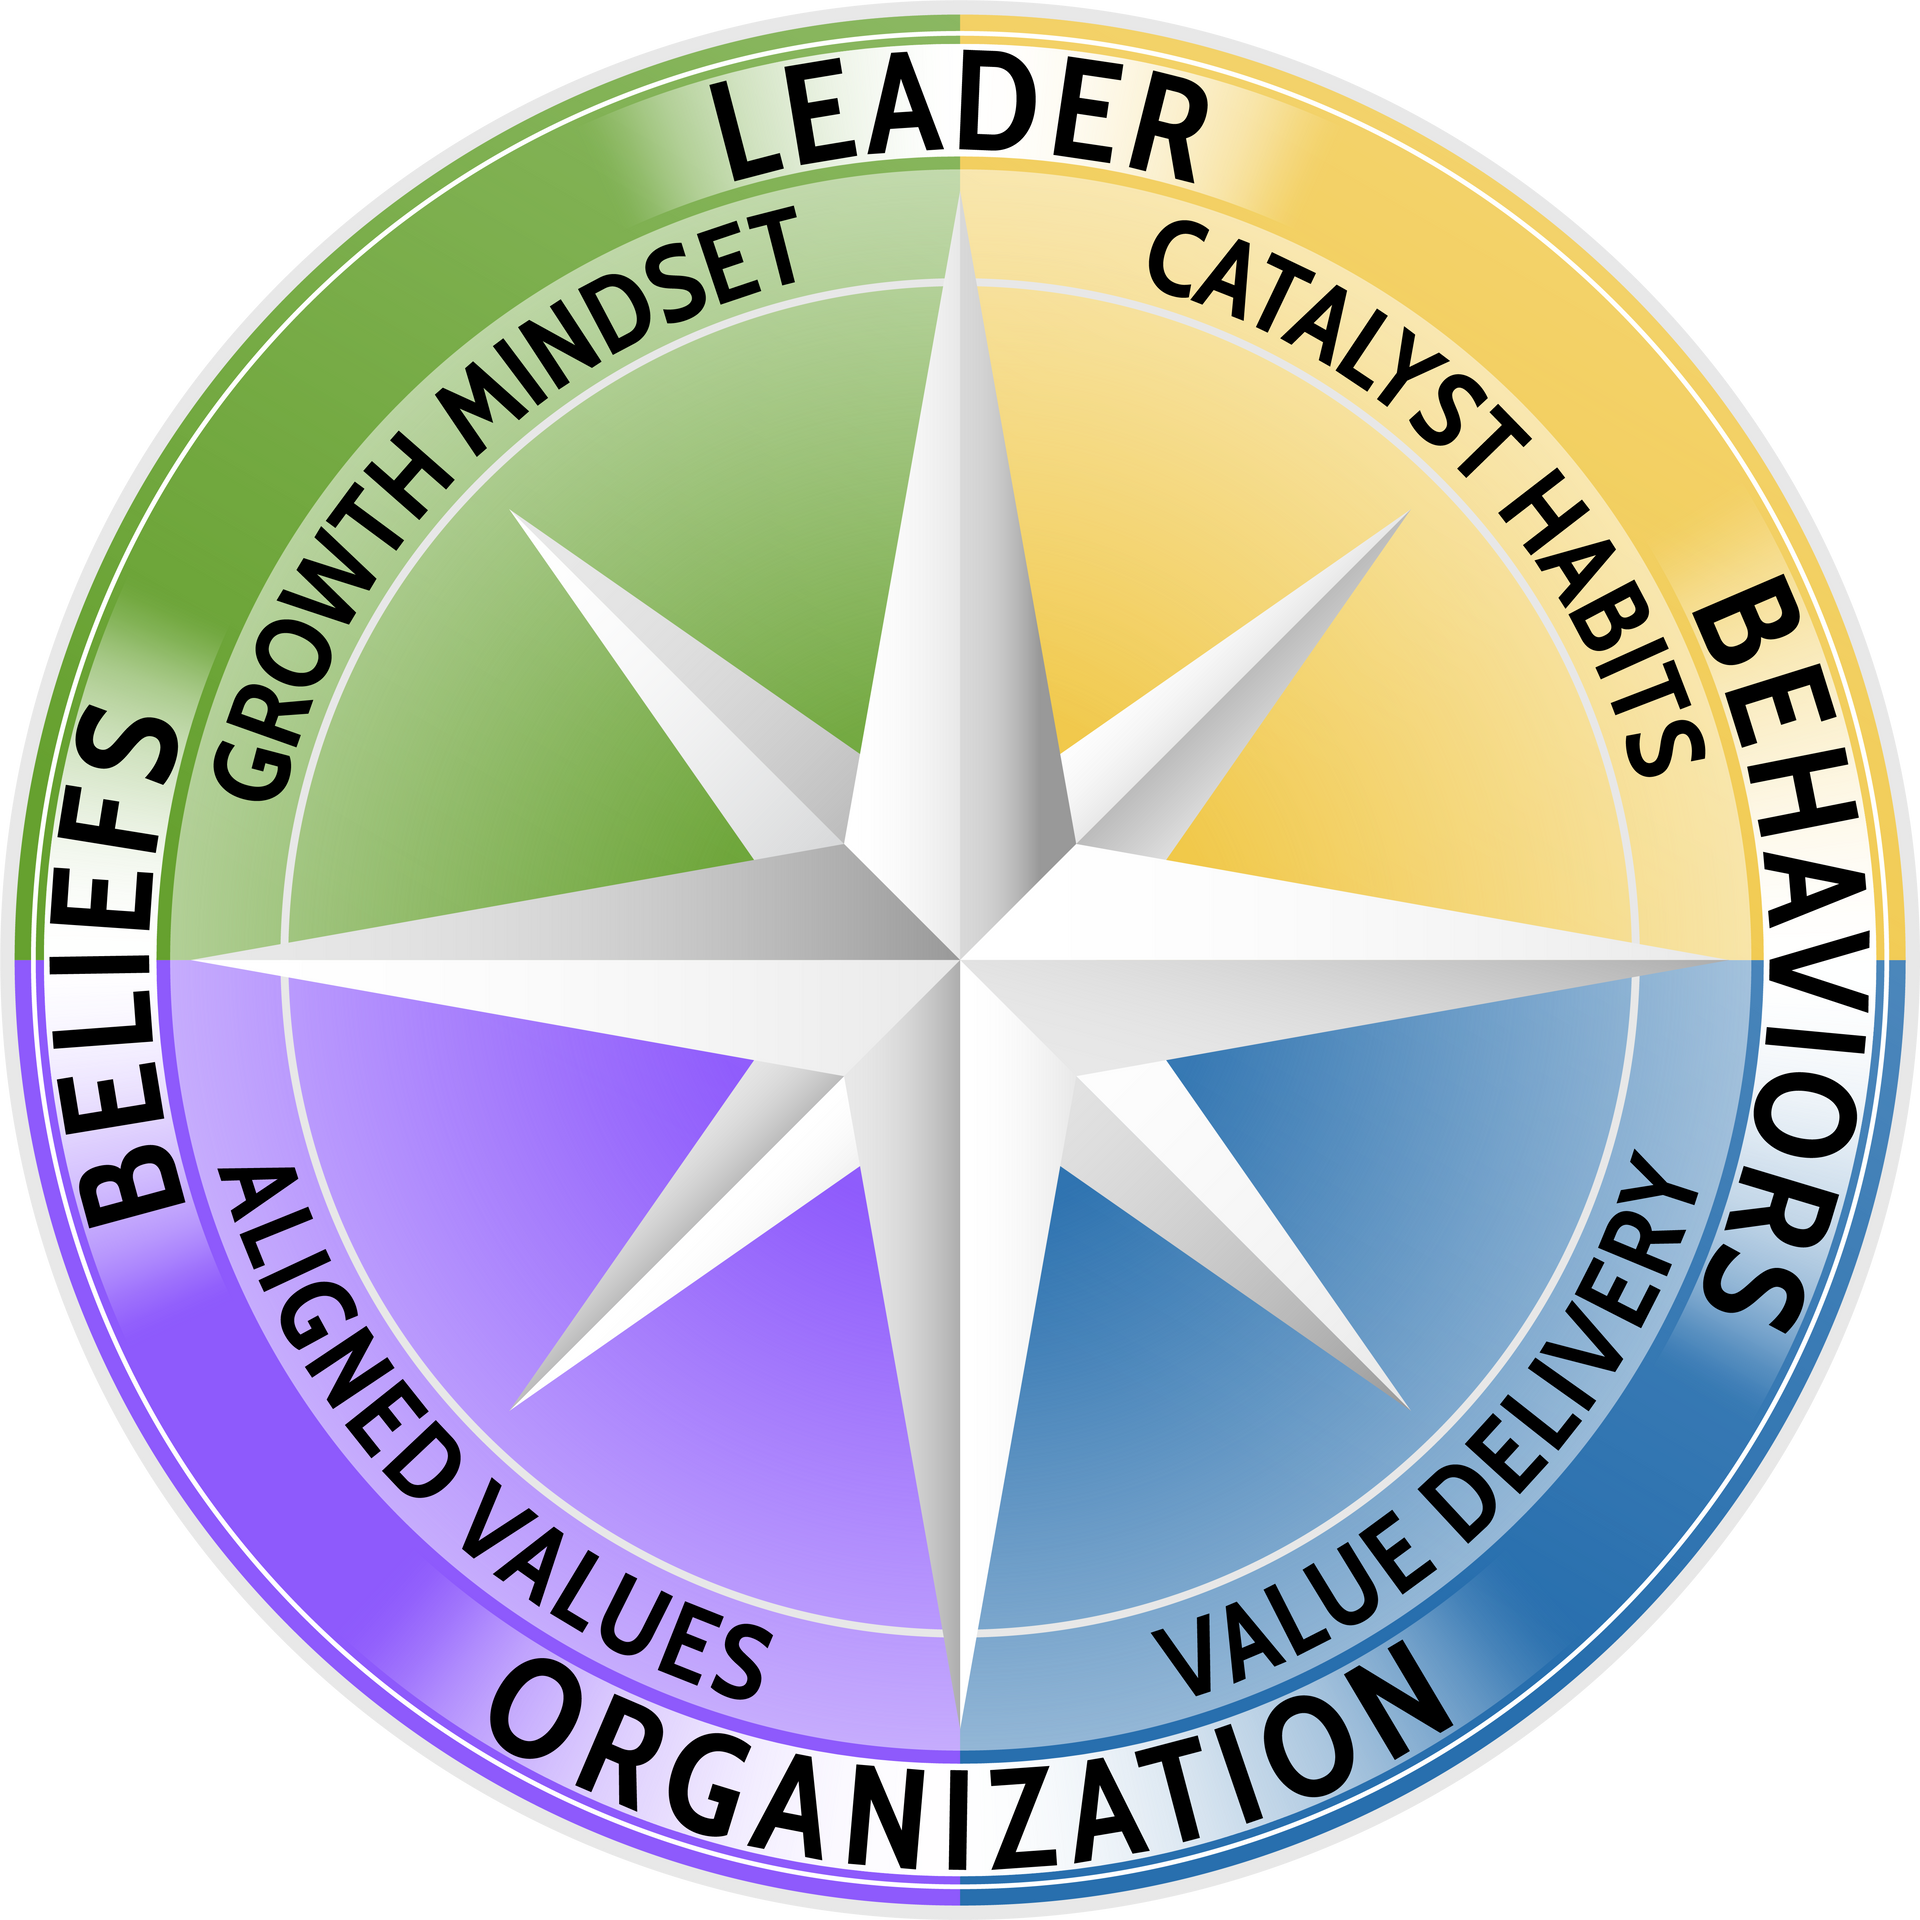 Agile Leadership Journey's compass with the words leader (at top) and organization (at bottom), beliefs (at left) and behaviors (at right) appearing in the outer circle as the directions of the compass. The inner part of the compass is divided into quarters with the words growth mindset and catalyst habits in the top two quarters and aligned values and value delivery in the bottom quarters.